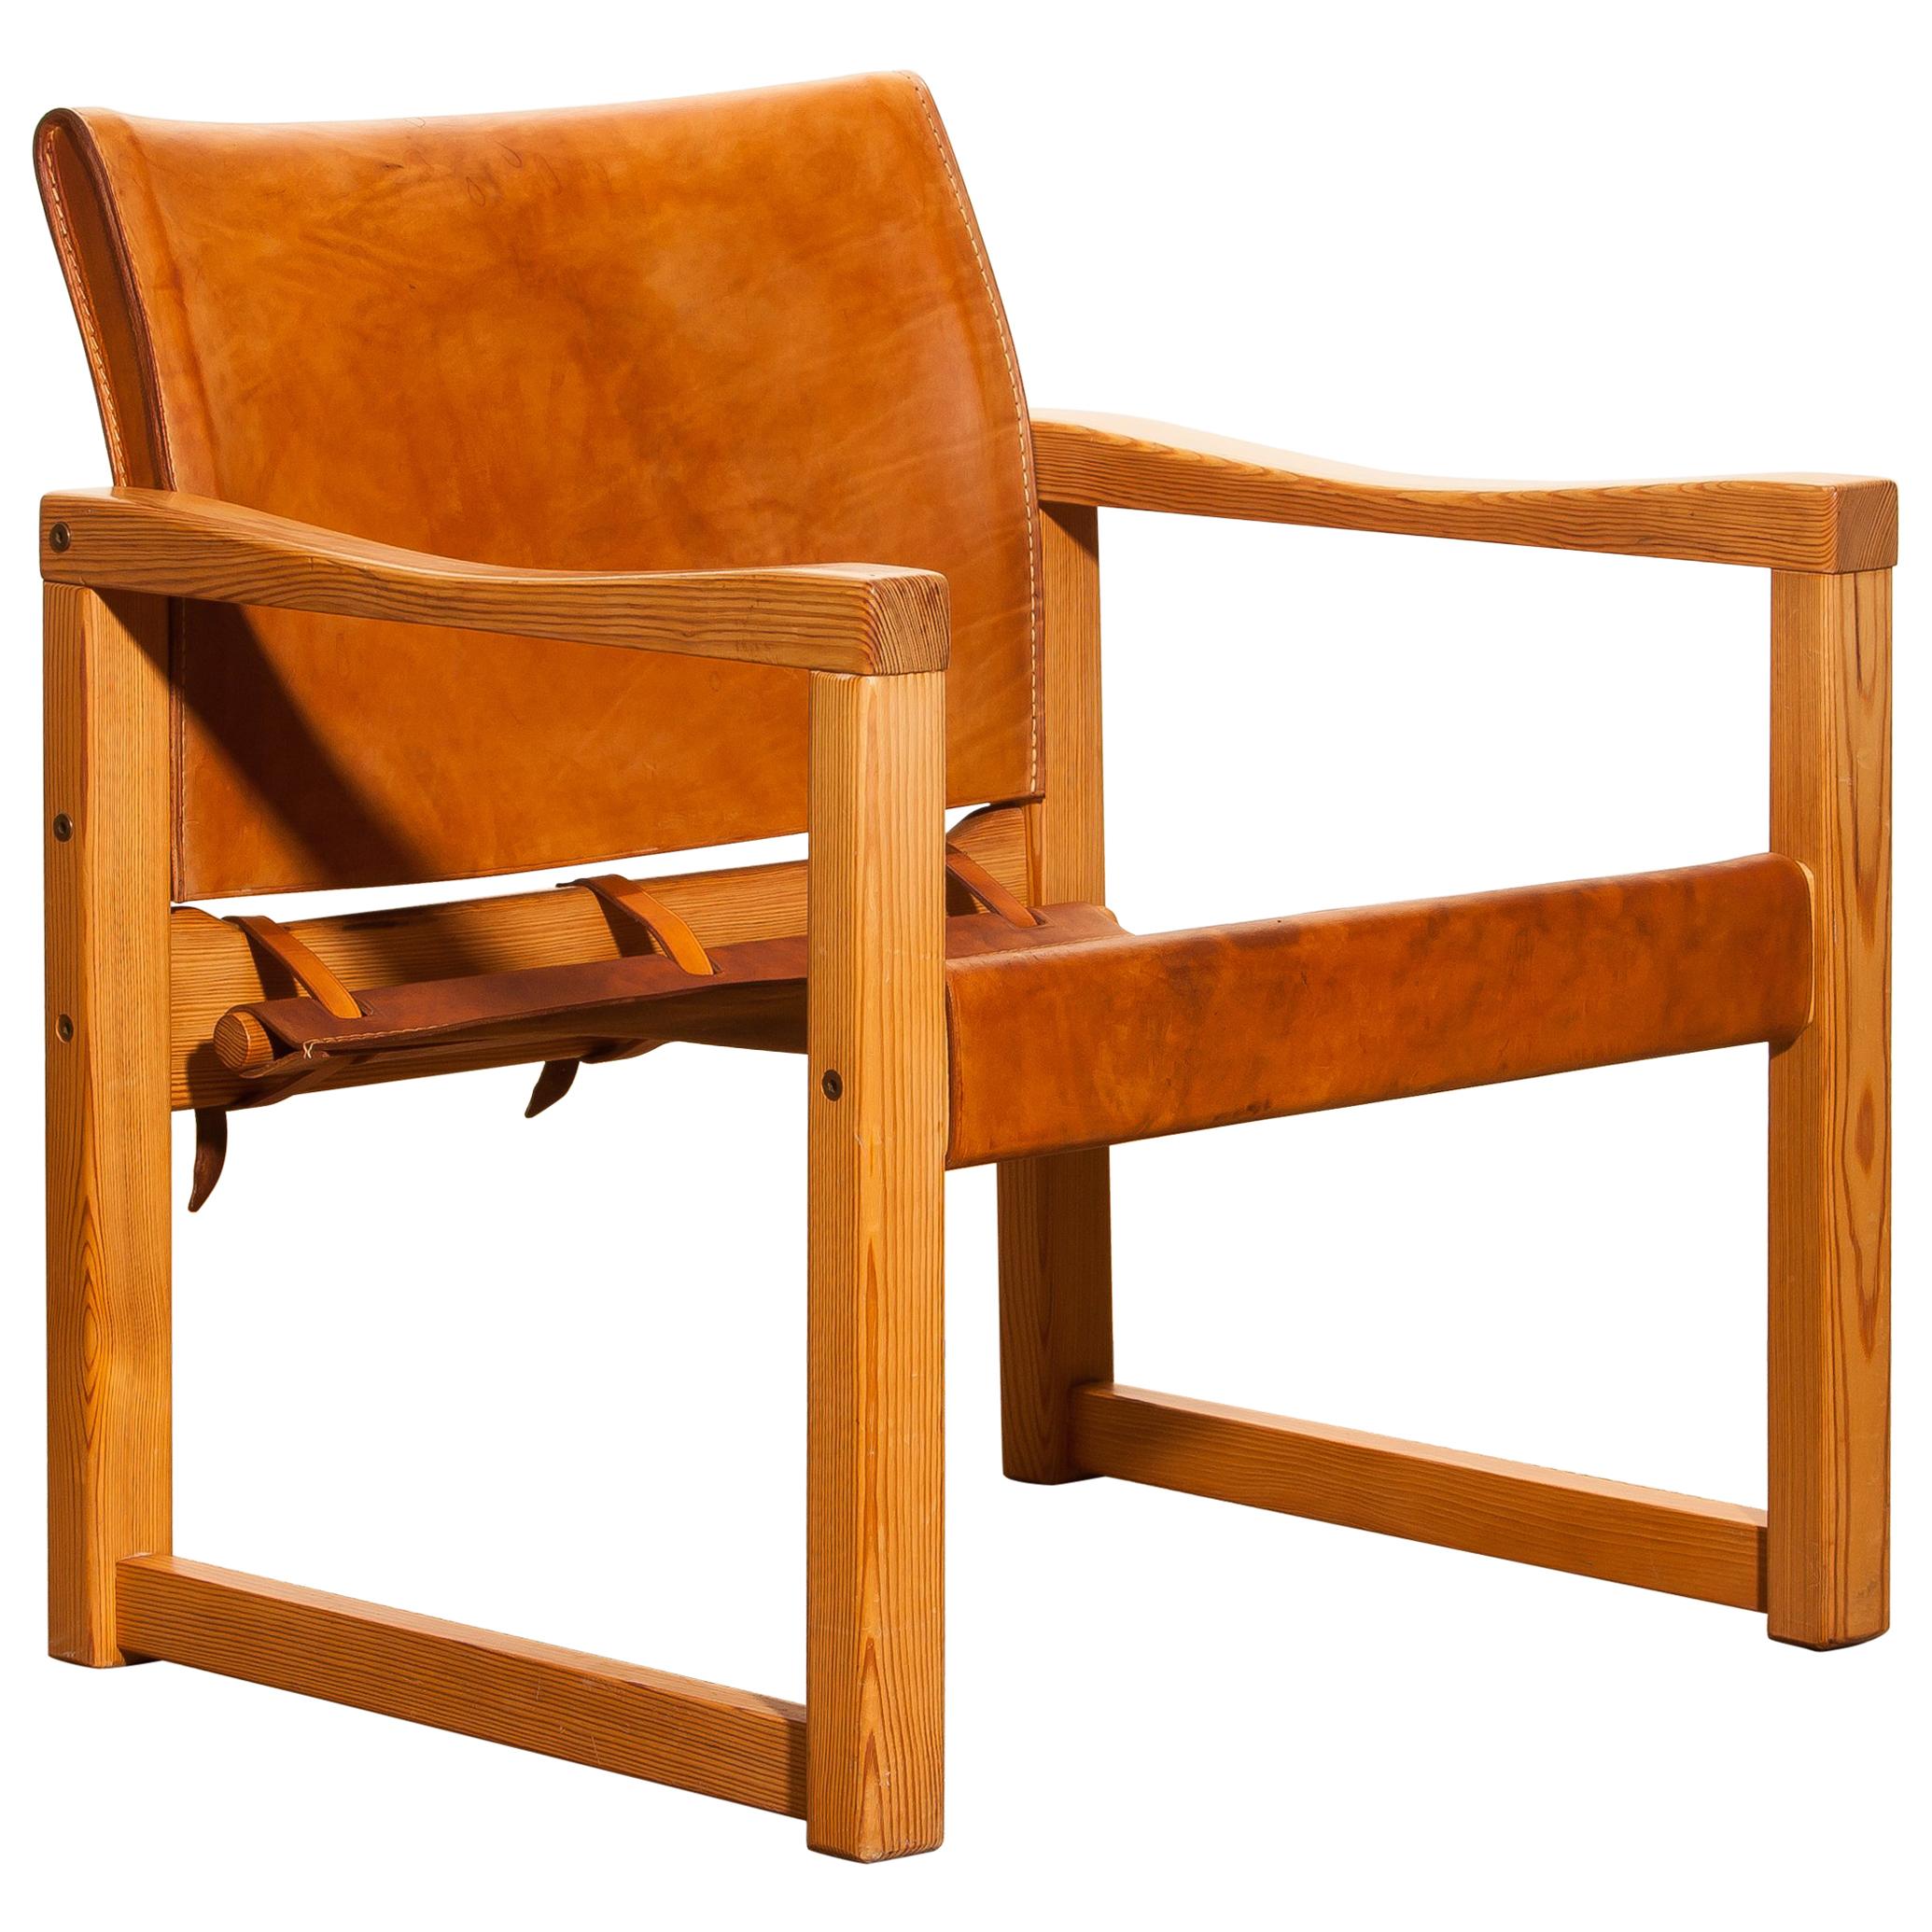 1970s, Cognac Leather Safari Chair by Karin Mobring, Sweden